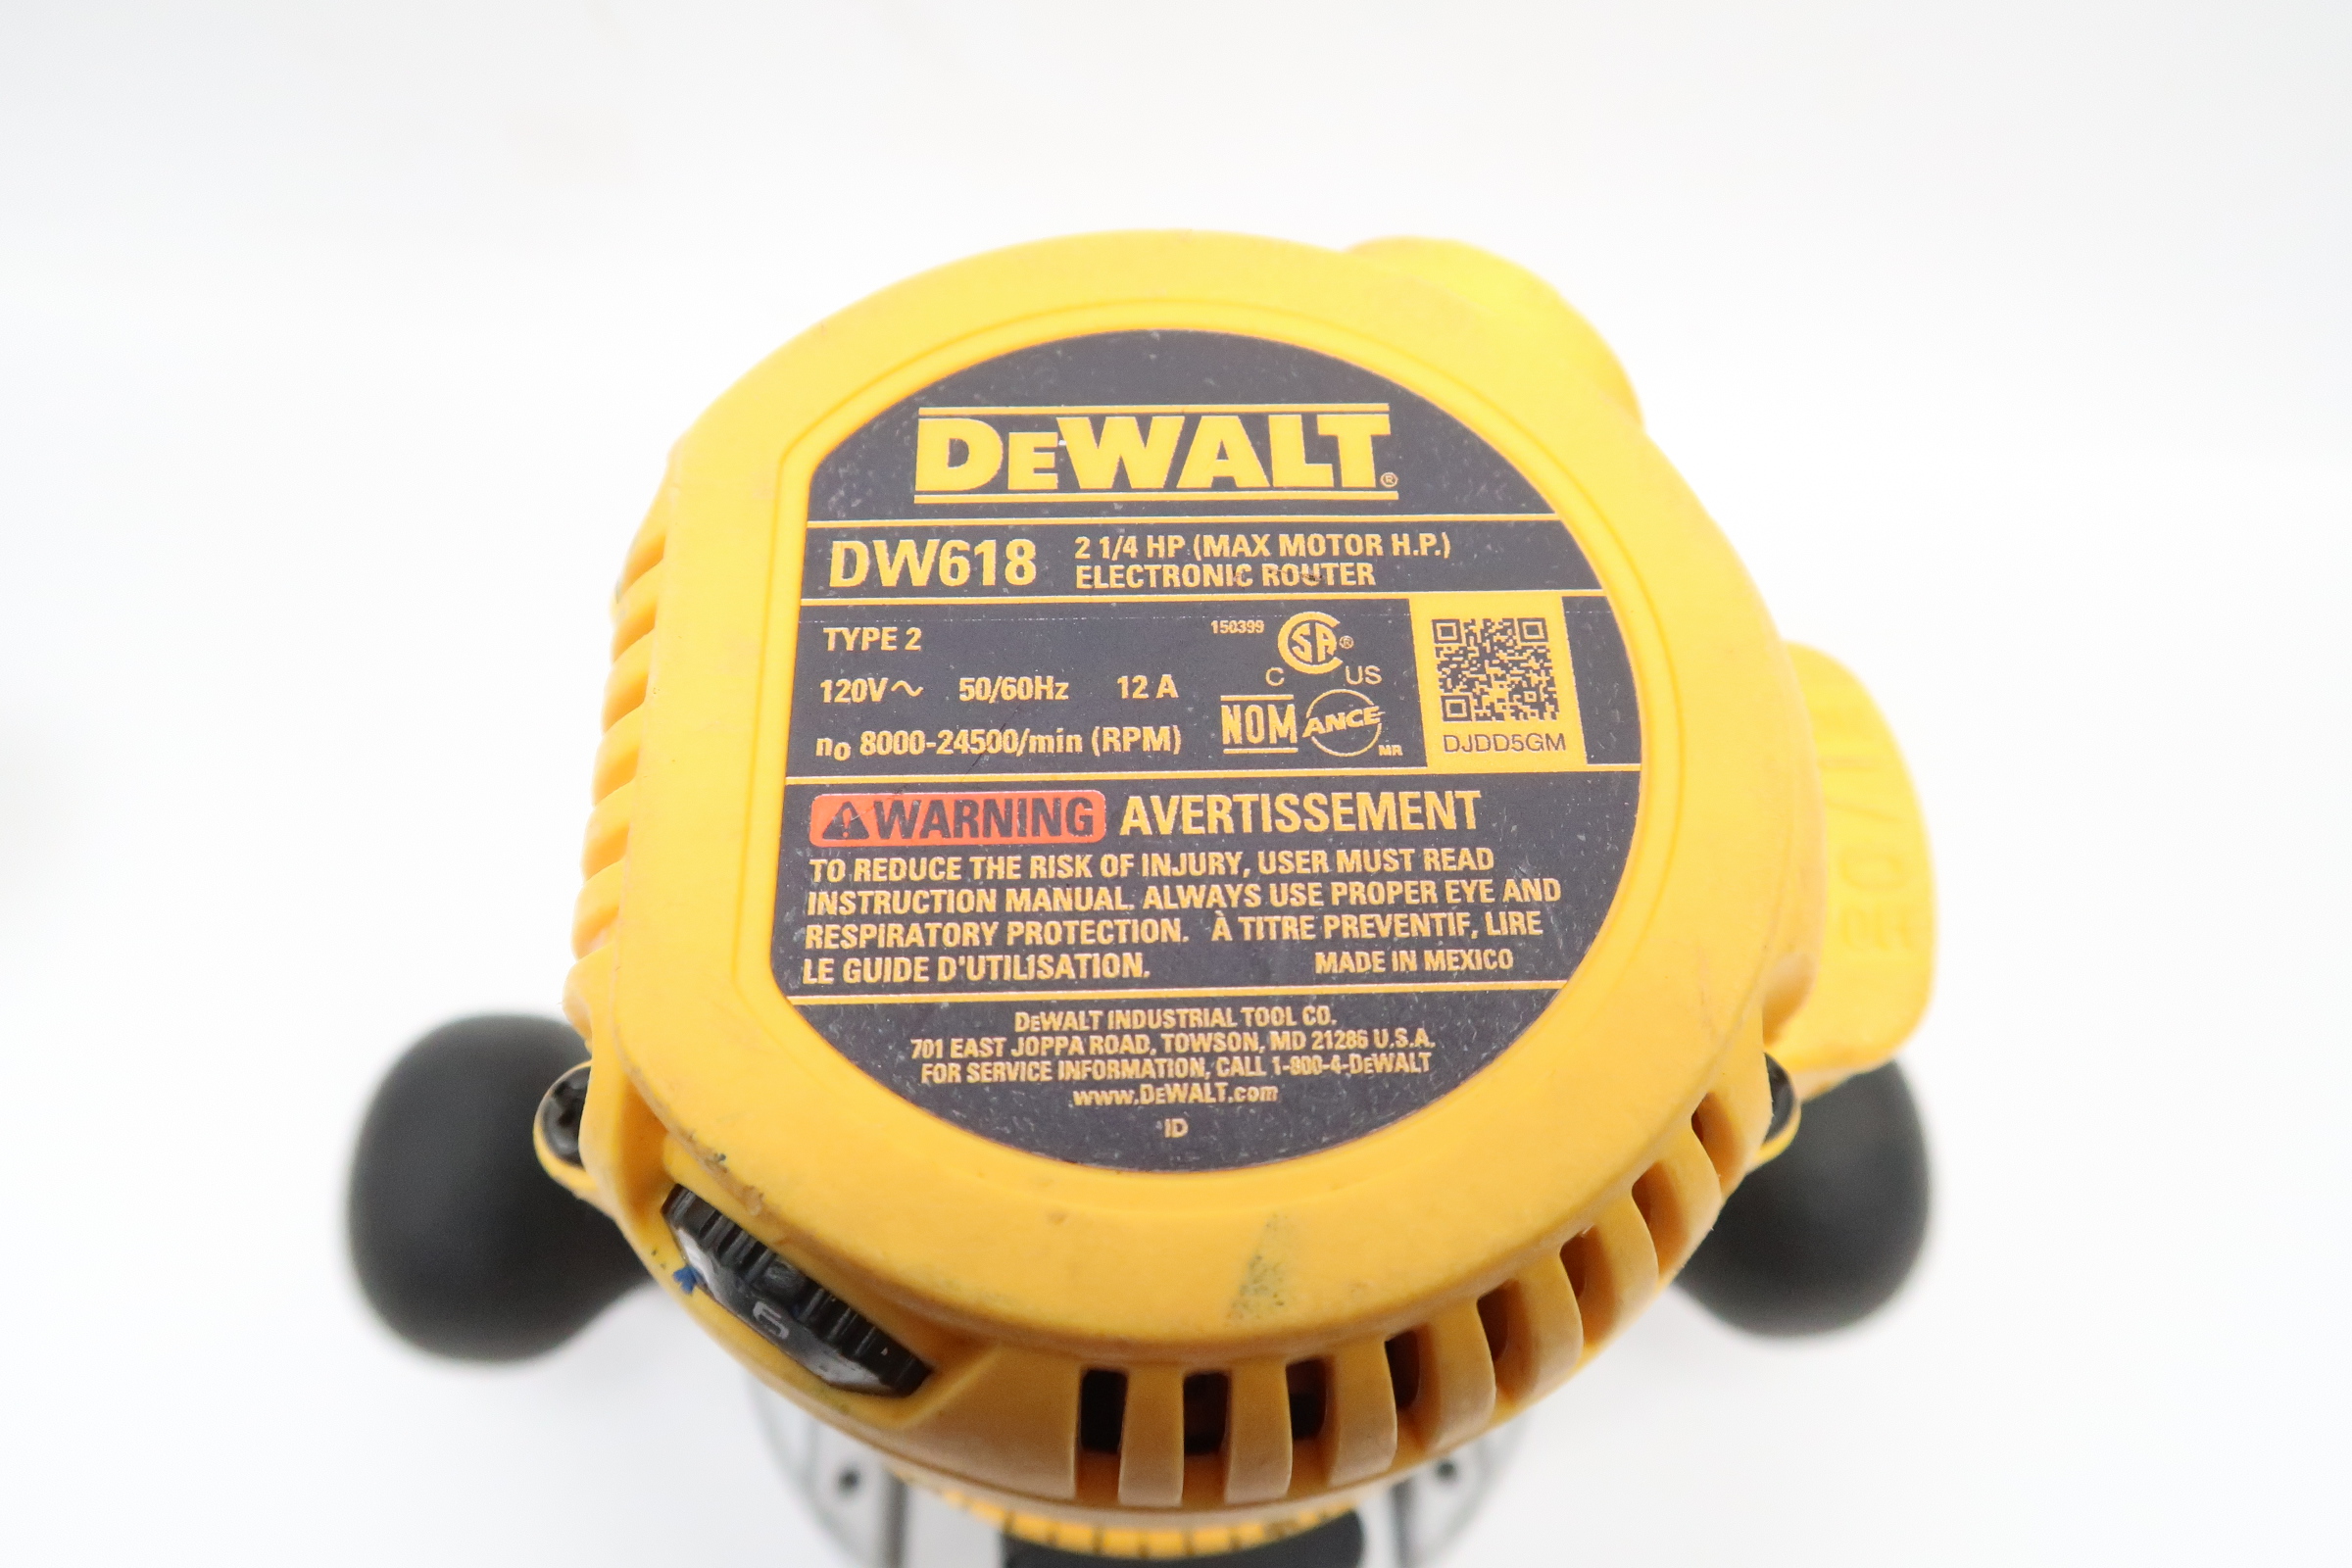 DEWALT Router, Fixed Base, 12-Amp, 24,000 RPM Variable Speed Trigger, 2-1 4HP, Corded (DW618) Yellow - 2